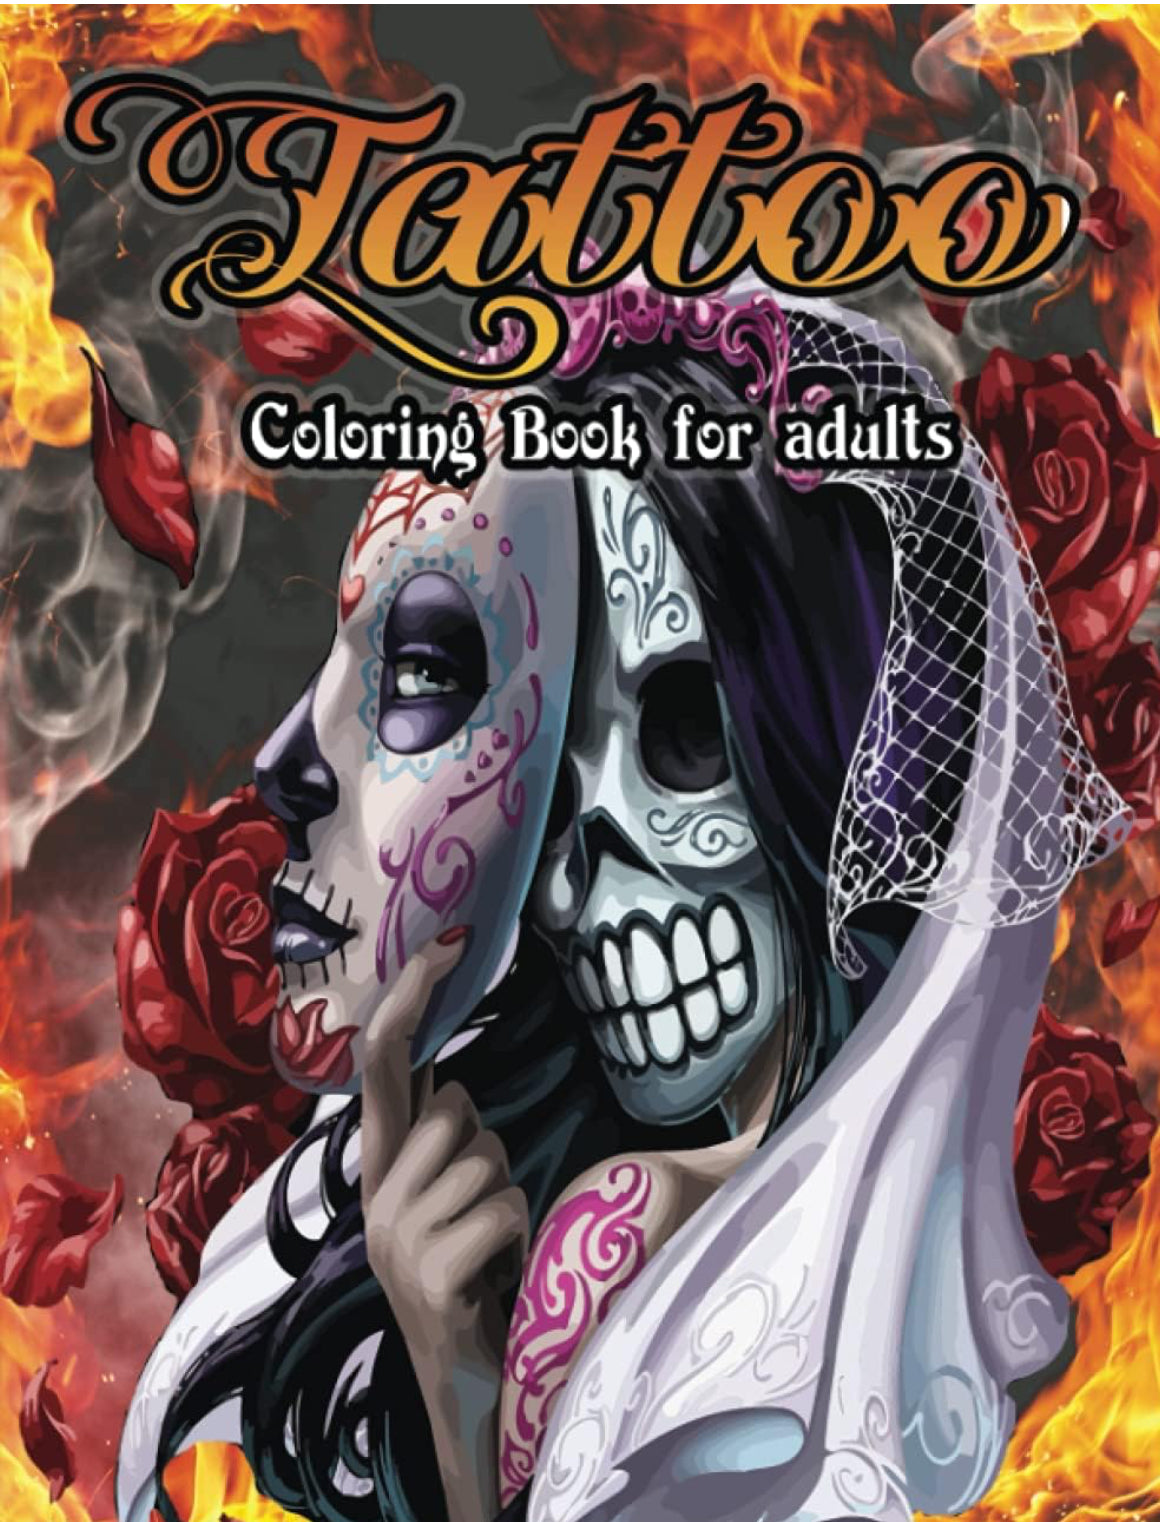 Tattoo Coloring Book for adults: Tattoo Coloring Book for Adults:50 Coloring Pages For Adult Relaxation With Beautiful Modern Tattoo Designs Such As Sugar Skulls, Hearts, Roses and More